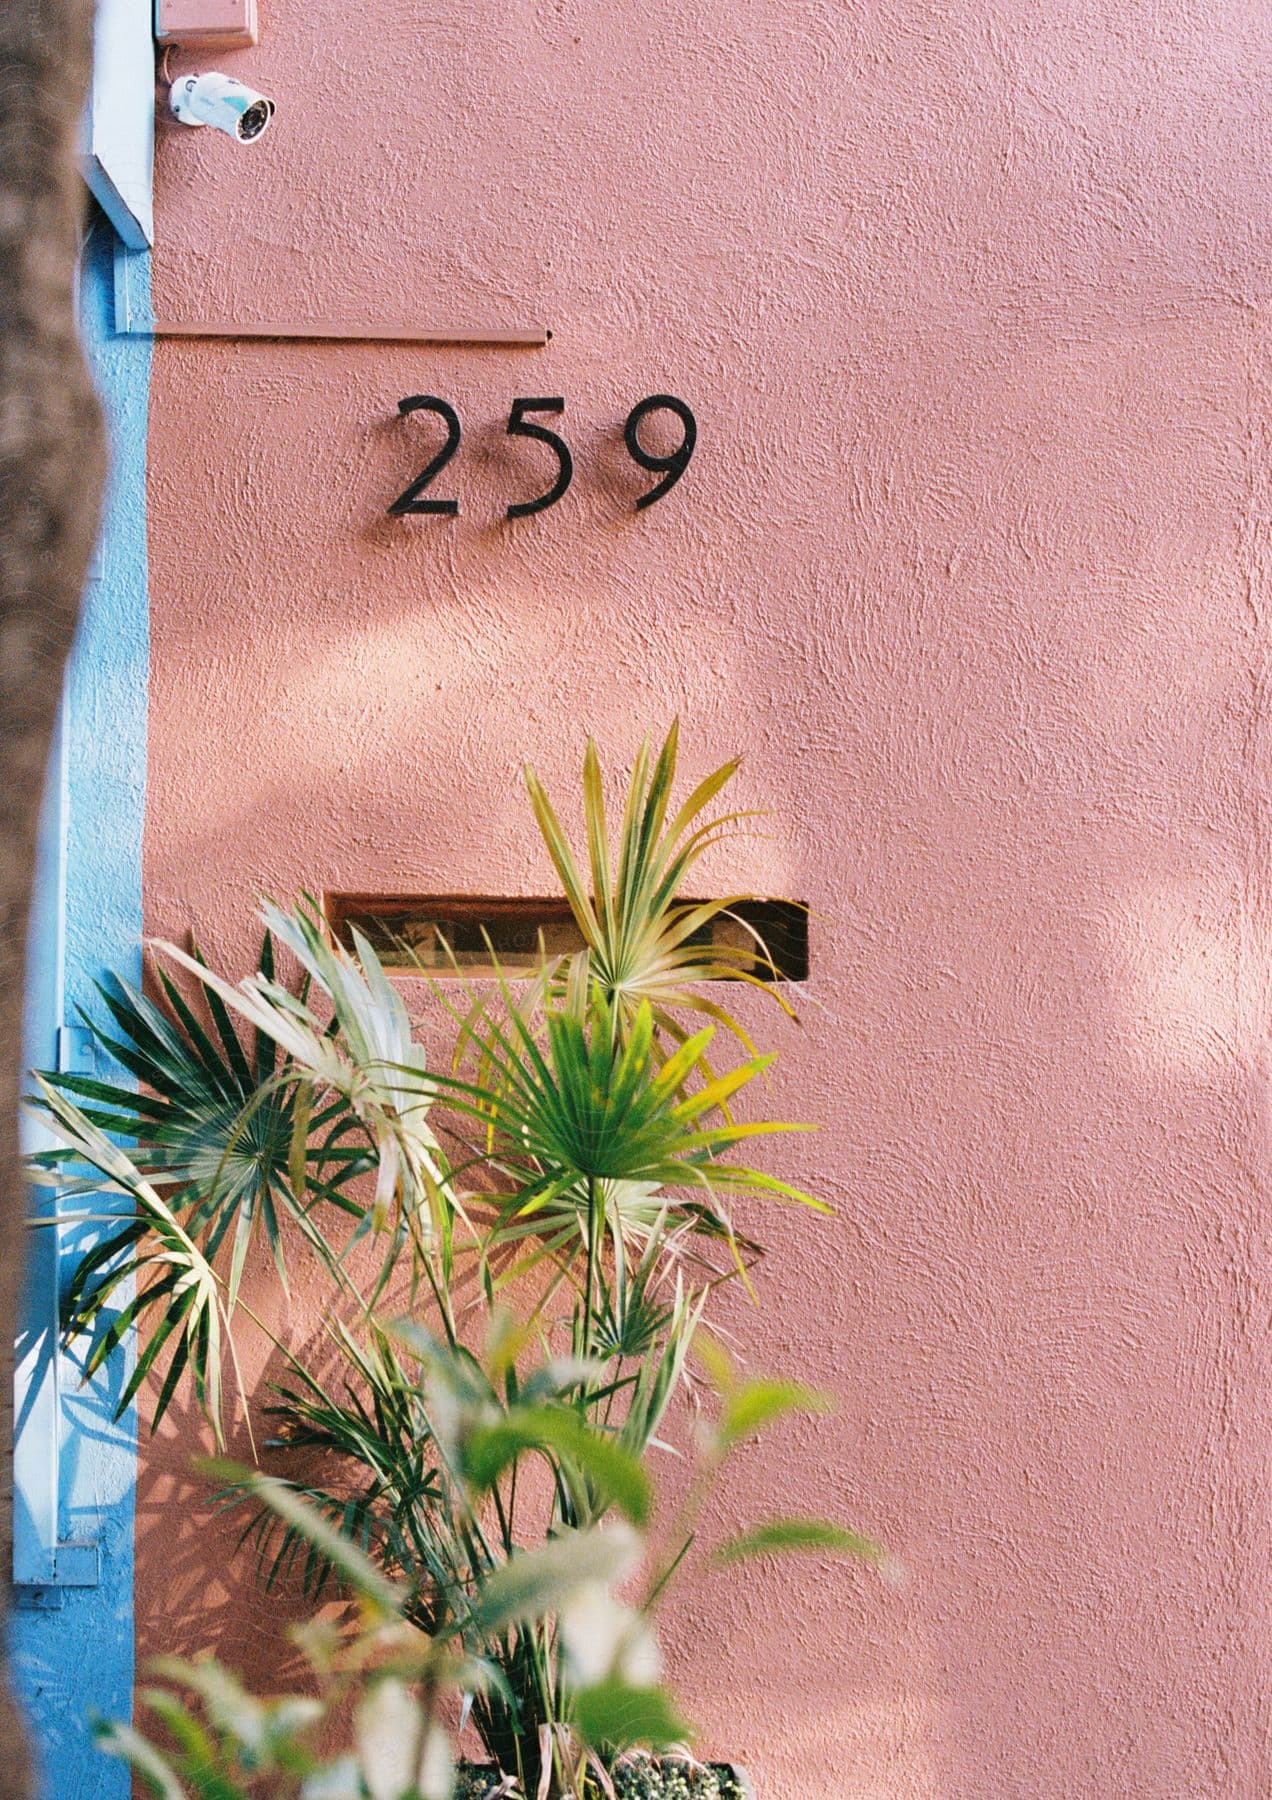 A tropical plant against a coral colored house exterior with a large house number